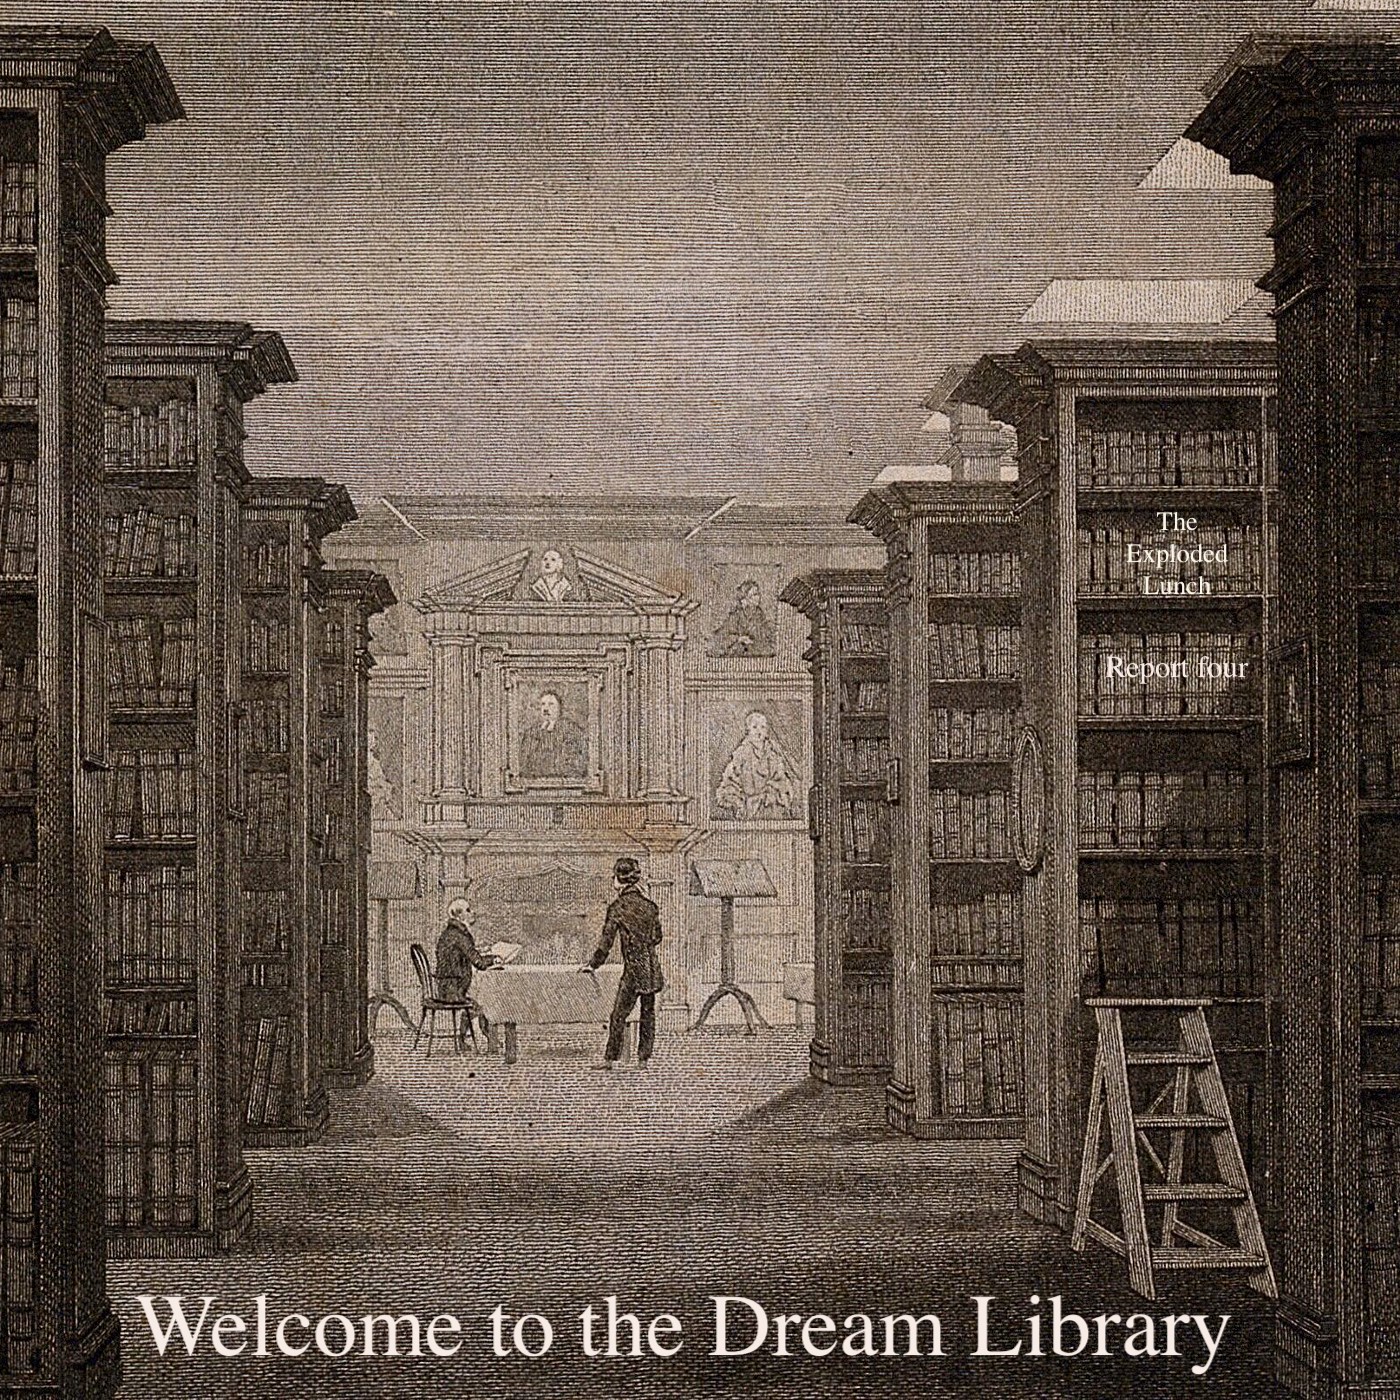 Dominic Smith – The Exploded Lunch, report four: Welcome to the dream library